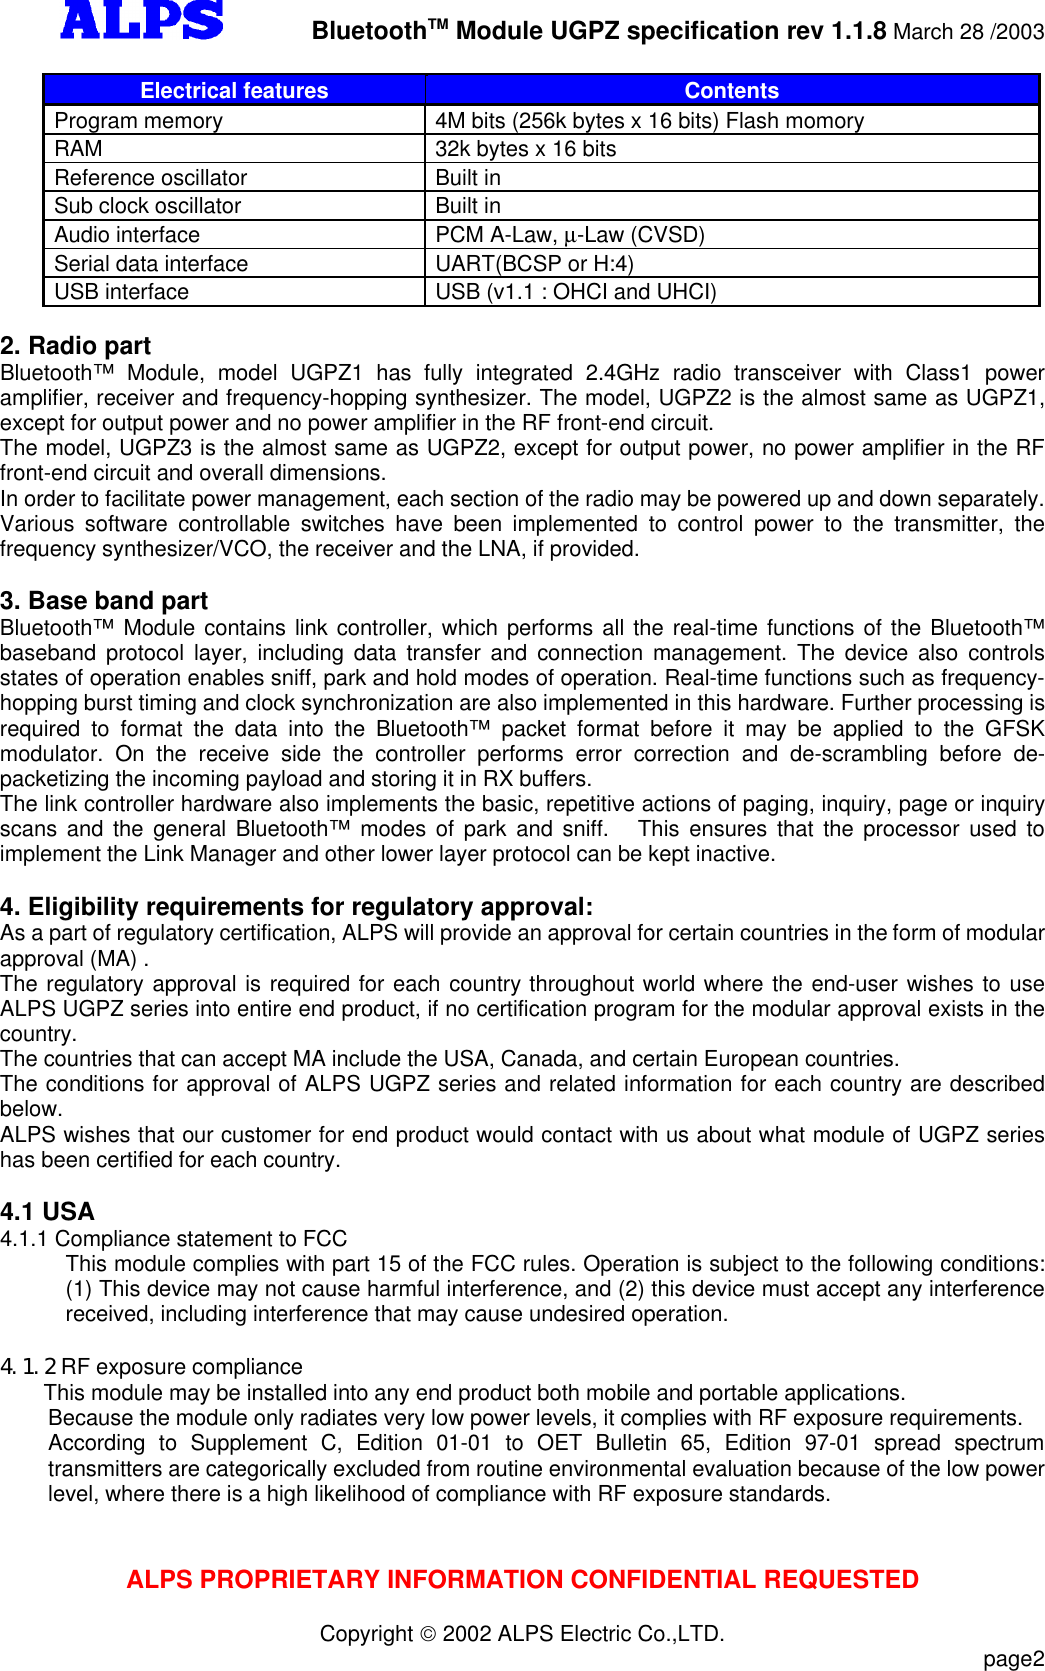         BluetoothTM Module UGPZ specification rev 1.1.8 March 28 /2003ALPS PROPRIETARY INFORMATION CONFIDENTIAL REQUESTEDCopyright  2002 ALPS Electric Co.,LTD.                           page2Electrical features ContentsProgram memory 4M bits (256k bytes x 16 bits) Flash momoryRAM 32k bytes x 16 bitsReference oscillator Built inSub clock oscillator Built inAudio interface PCM A-Law, µ-Law (CVSD)Serial data interface UART(BCSP or H:4)USB interface USB (v1.1 : OHCI and UHCI)2. Radio partBluetooth™ Module, model UGPZ1 has fully integrated 2.4GHz radio transceiver with  Class1 poweramplifier, receiver and frequency-hopping synthesizer. The model, UGPZ2 is the almost same as UGPZ1,except for output power and no power amplifier in the RF front-end circuit.The model, UGPZ3 is the almost same as UGPZ2, except for output power, no power amplifier in the RFfront-end circuit and overall dimensions.In order to facilitate power management, each section of the radio may be powered up and down separately.Various  software controllable switches have been implemented to control power to the transmitter, thefrequency synthesizer/VCO, the receiver and the LNA, if provided.3. Base band partBluetooth™ Module contains link controller, which performs all the real-time functions of the Bluetooth™baseband protocol layer, including data transfer and connection management. The device also controlsstates of operation enables sniff, park and hold modes of operation. Real-time functions such as frequency-hopping burst timing and clock synchronization are also implemented in this hardware. Further processing isrequired to format the data into the Bluetooth™ packet format before it may be applied to the GFSKmodulator. On the receive side the controller performs error correction and de-scrambling before de-packetizing the incoming payload and storing it in RX buffers.The link controller hardware also implements the basic, repetitive actions of paging, inquiry, page or inquiryscans and the general Bluetooth™ modes of park and sniff.  This ensures that the processor used toimplement the Link Manager and other lower layer protocol can be kept inactive.4. Eligibility requirements for regulatory approval:As a part of regulatory certification, ALPS will provide an approval for certain countries in the form of modularapproval (MA) .The regulatory approval is required for each country throughout world where the end-user wishes to useALPS UGPZ series into entire end product, if no certification program for the modular approval exists in thecountry.The countries that can accept MA include the USA, Canada, and certain European countries.The conditions for approval of ALPS UGPZ series and related information for each country are describedbelow.ALPS wishes that our customer for end product would contact with us about what module of UGPZ serieshas been certified for each country.4.1 USA4.1.1 Compliance statement to FCCThis module complies with part 15 of the FCC rules. Operation is subject to the following conditions:(1) This device may not cause harmful interference, and (2) this device must accept any interferencereceived, including interference that may cause undesired operation.4.1.2 RF exposure complianceThis module may be installed into any end product both mobile and portable applications.Because the module only radiates very low power levels, it complies with RF exposure requirements.According to Supplement C, Edition 01-01 to OET Bulletin 65, Edition 97-01 spread spectrumtransmitters are categorically excluded from routine environmental evaluation because of the low powerlevel, where there is a high likelihood of compliance with RF exposure standards.